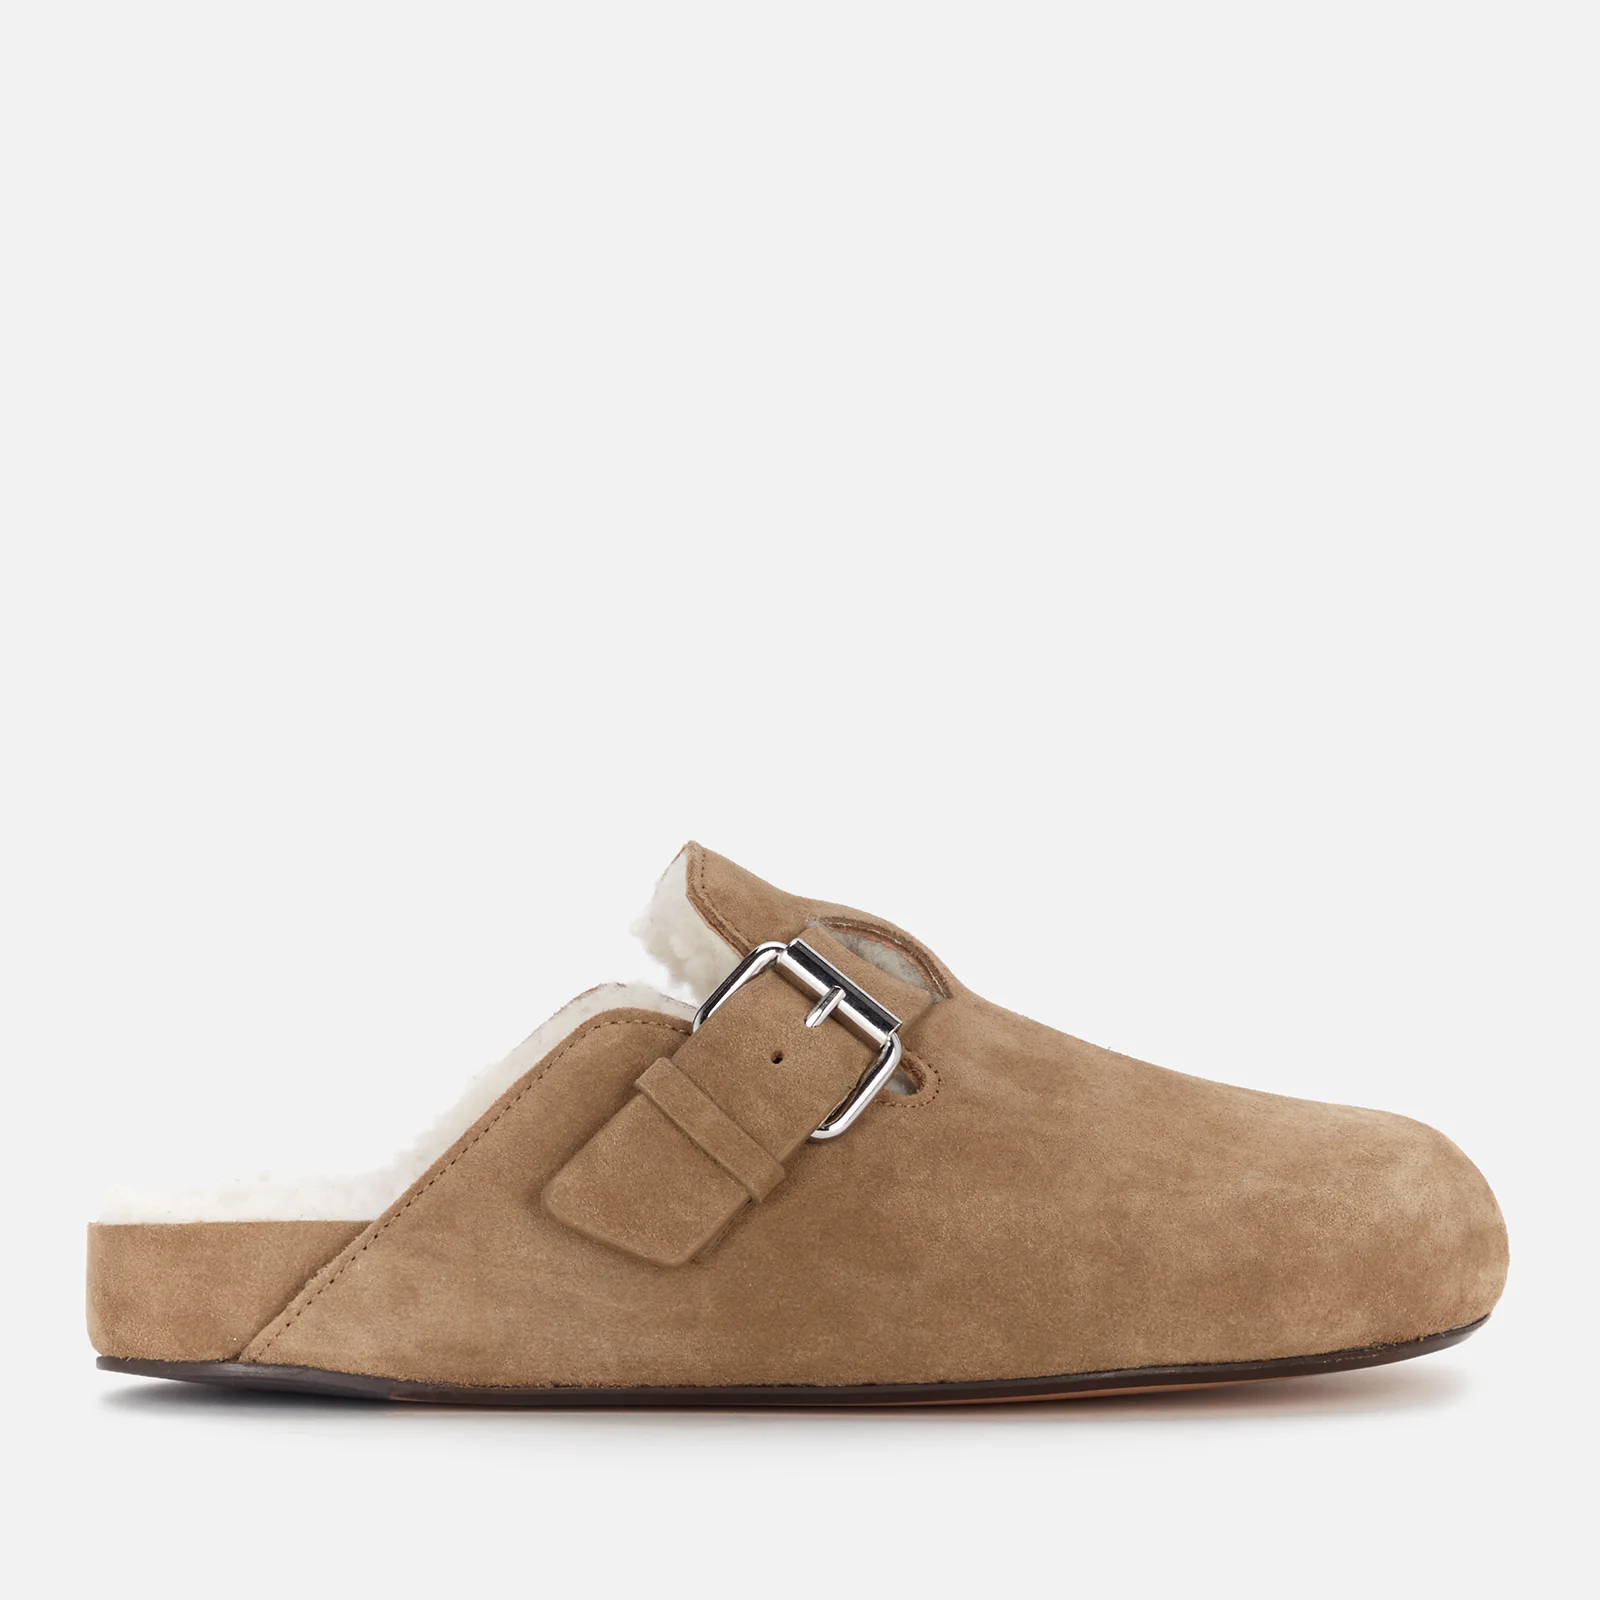 Marant Etoile Women's Mirvin Suede Mules - Taupe Image 1